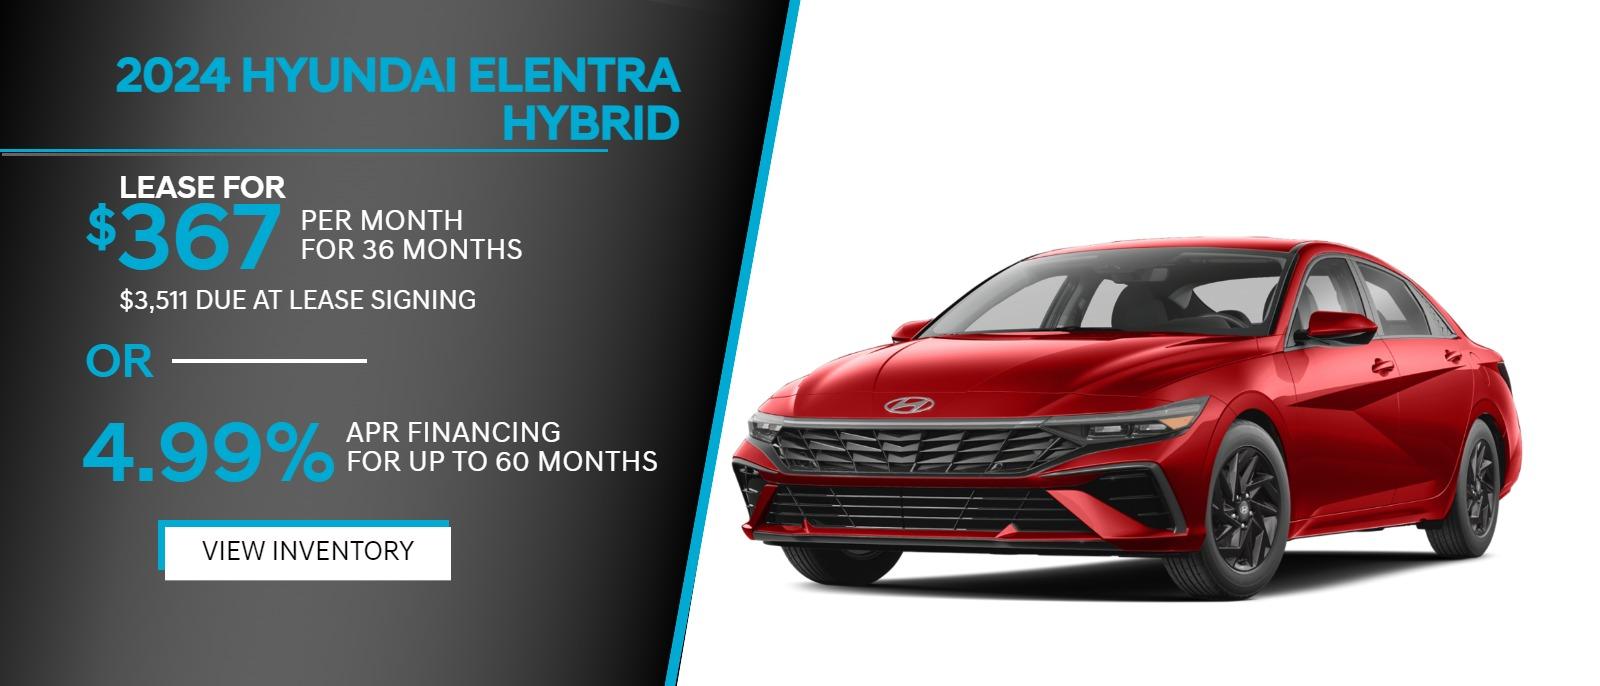 2024 ELANTRA Hybrid Limited
$367/mo
For 36 months with $3,511 due at lease signing
4.99% APR
Financing for up to 60 months